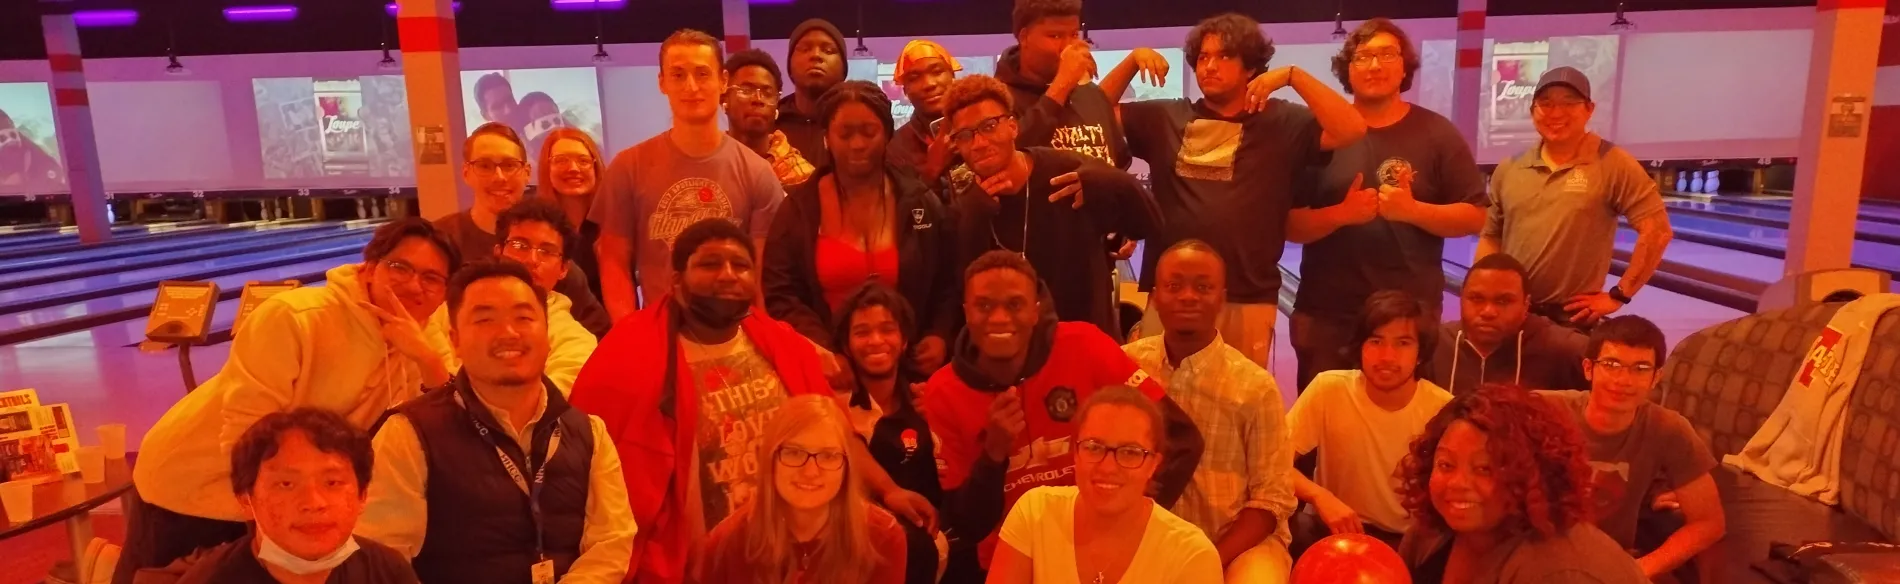 group photo from bowling